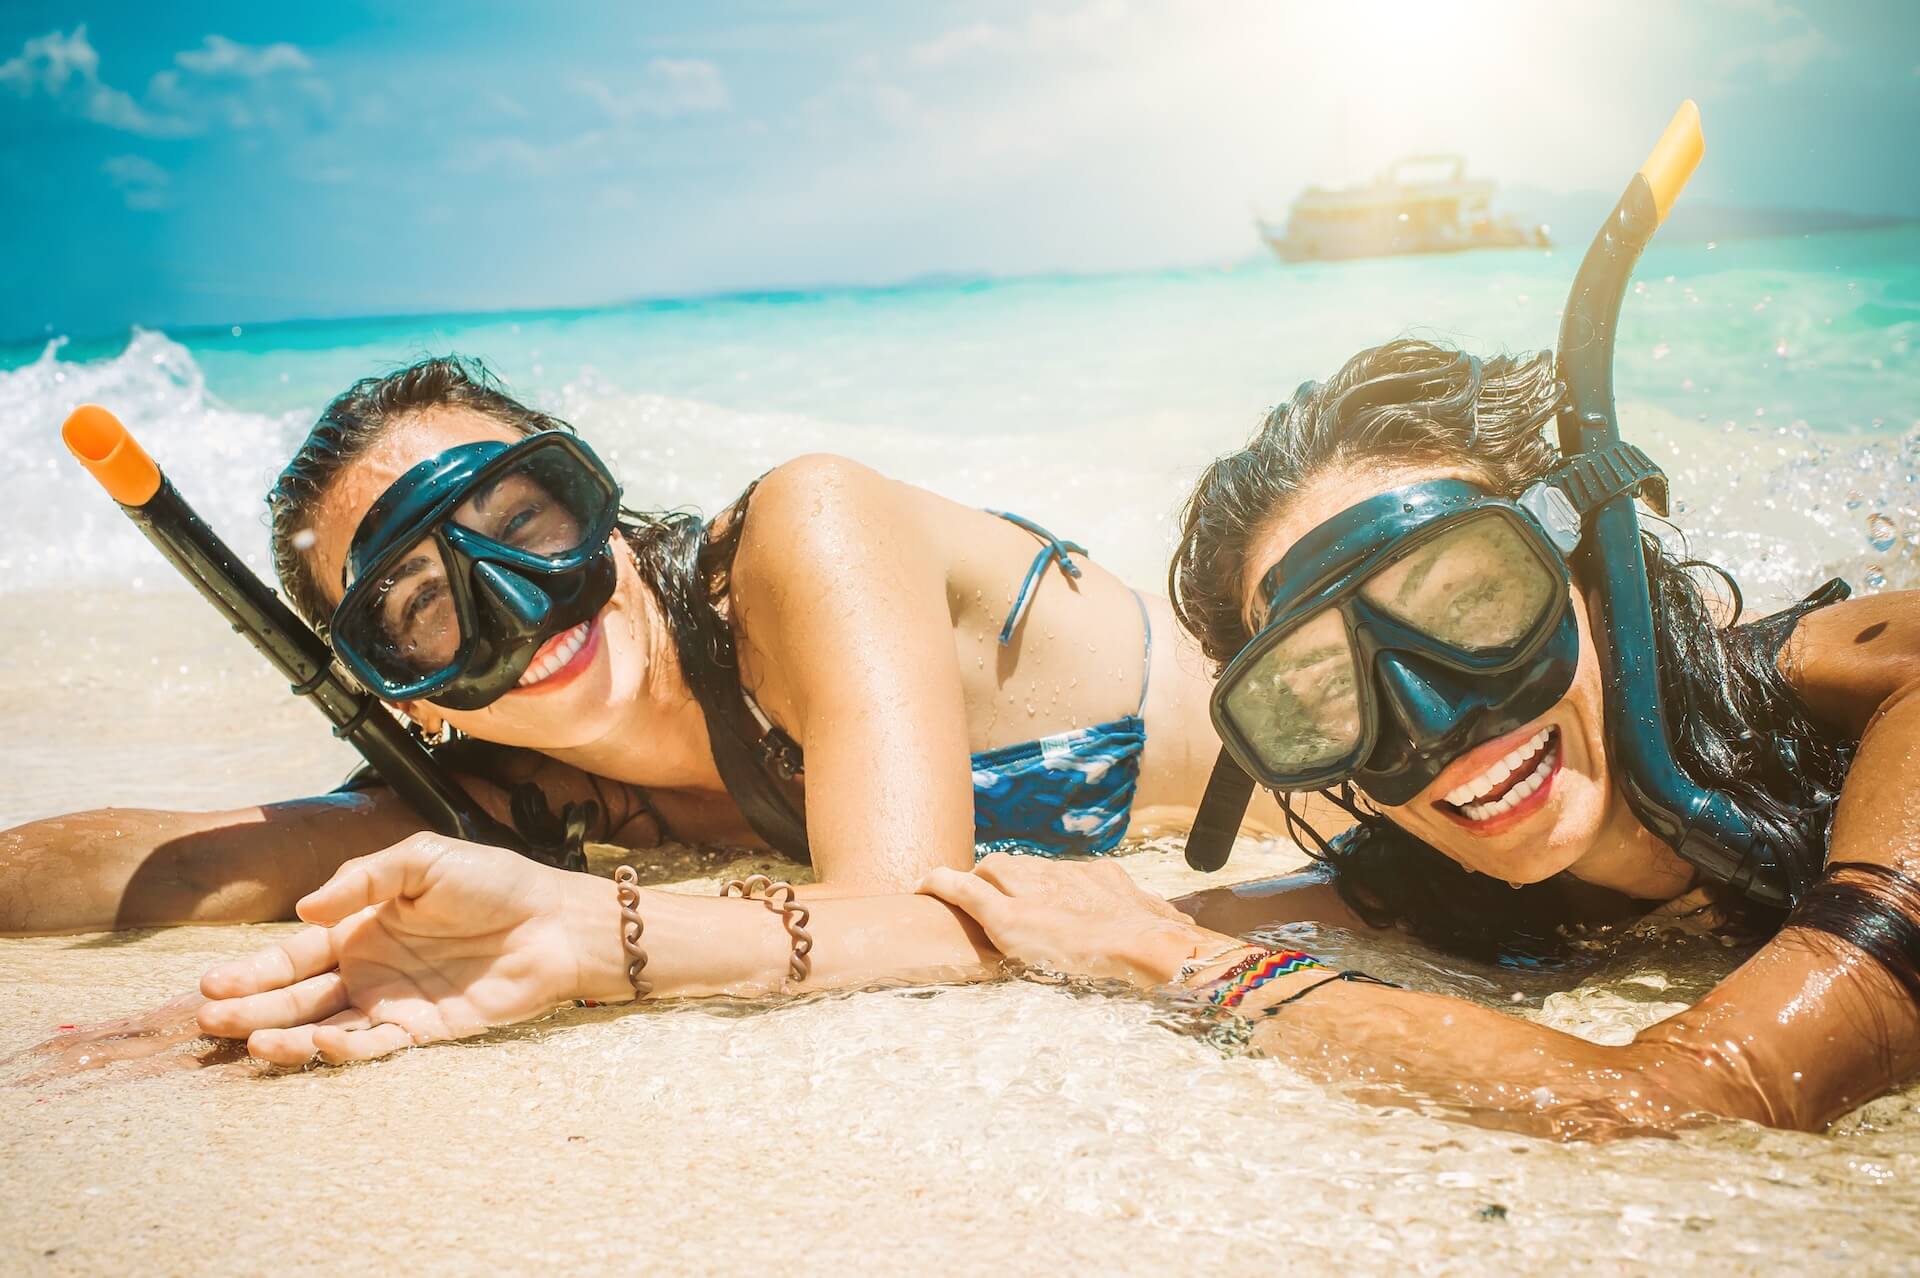 Girls with snorkeling gear on a beach